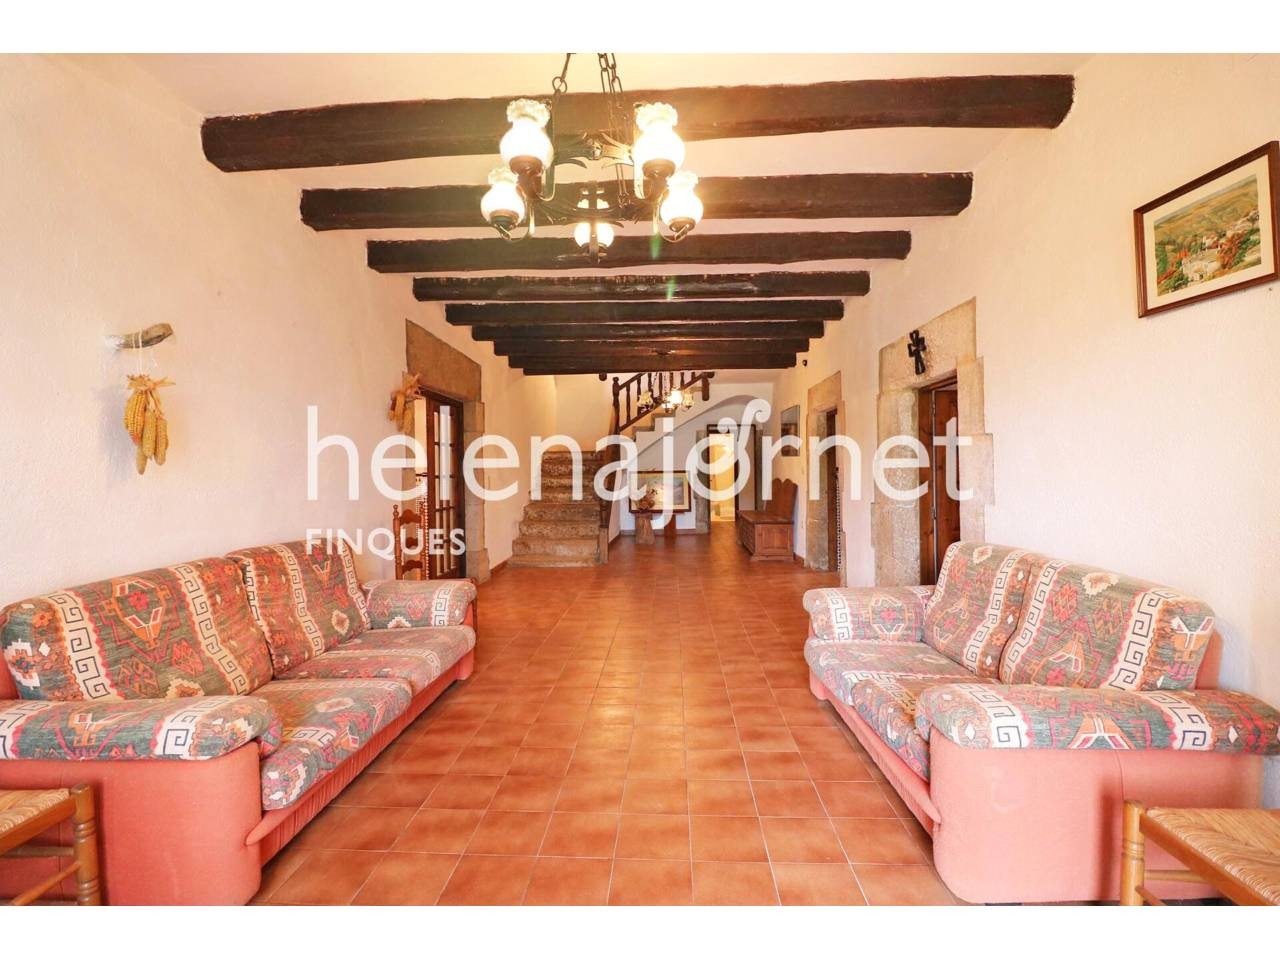 Catalan country house with 7Ha of land in Catalonia - 2477